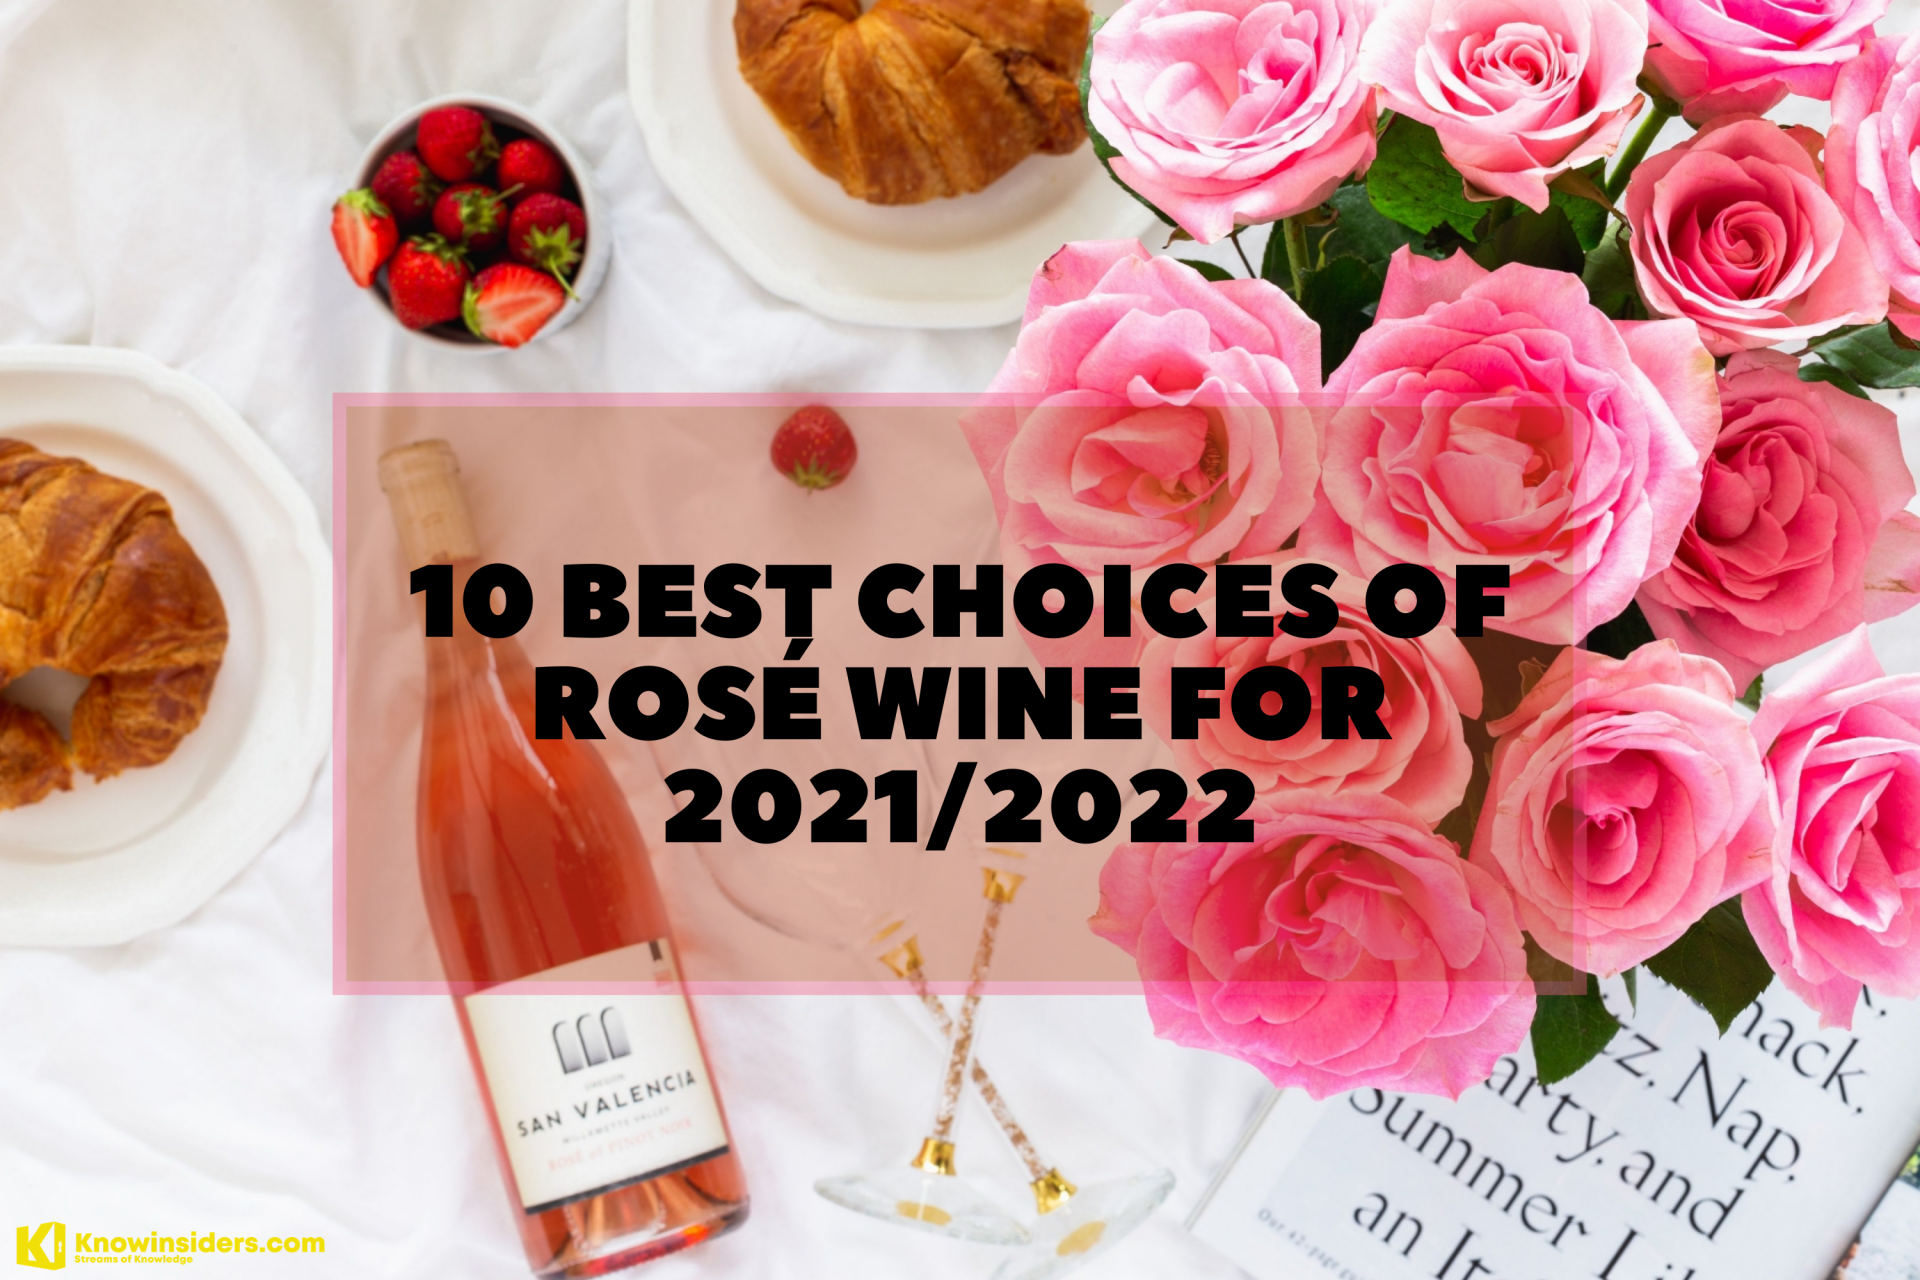 Top 10 Best Choices of Rosé Wine to Drink in 2021